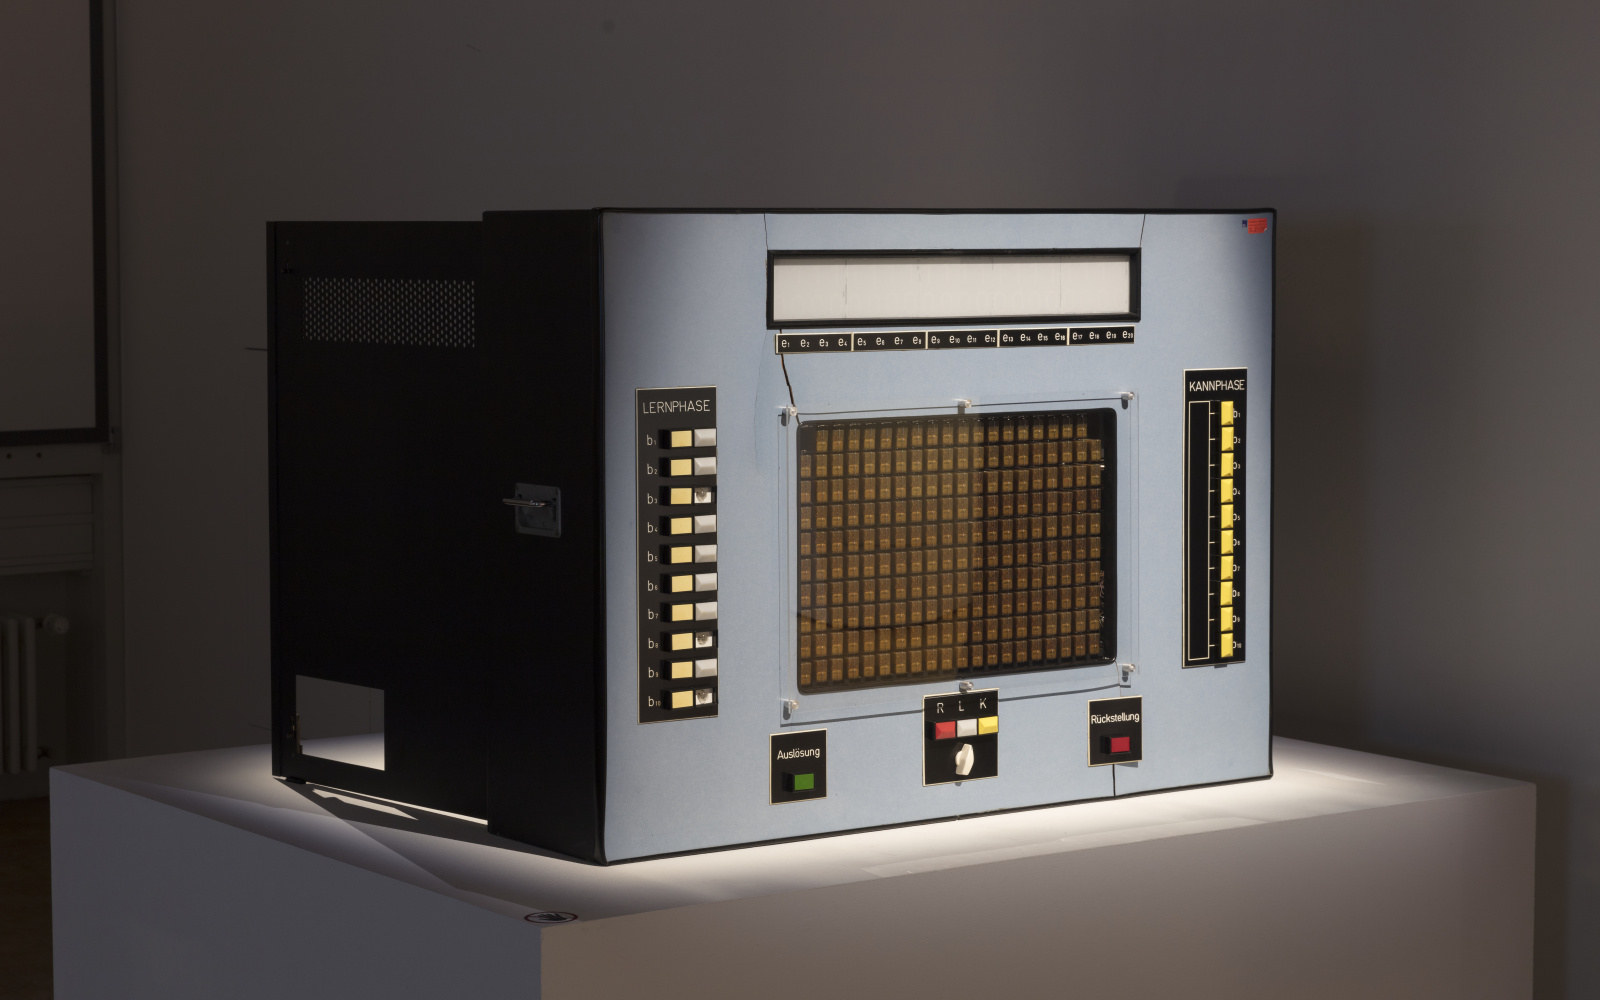 A learning computer from the 60s, rectangular, in grey and with many buttons.